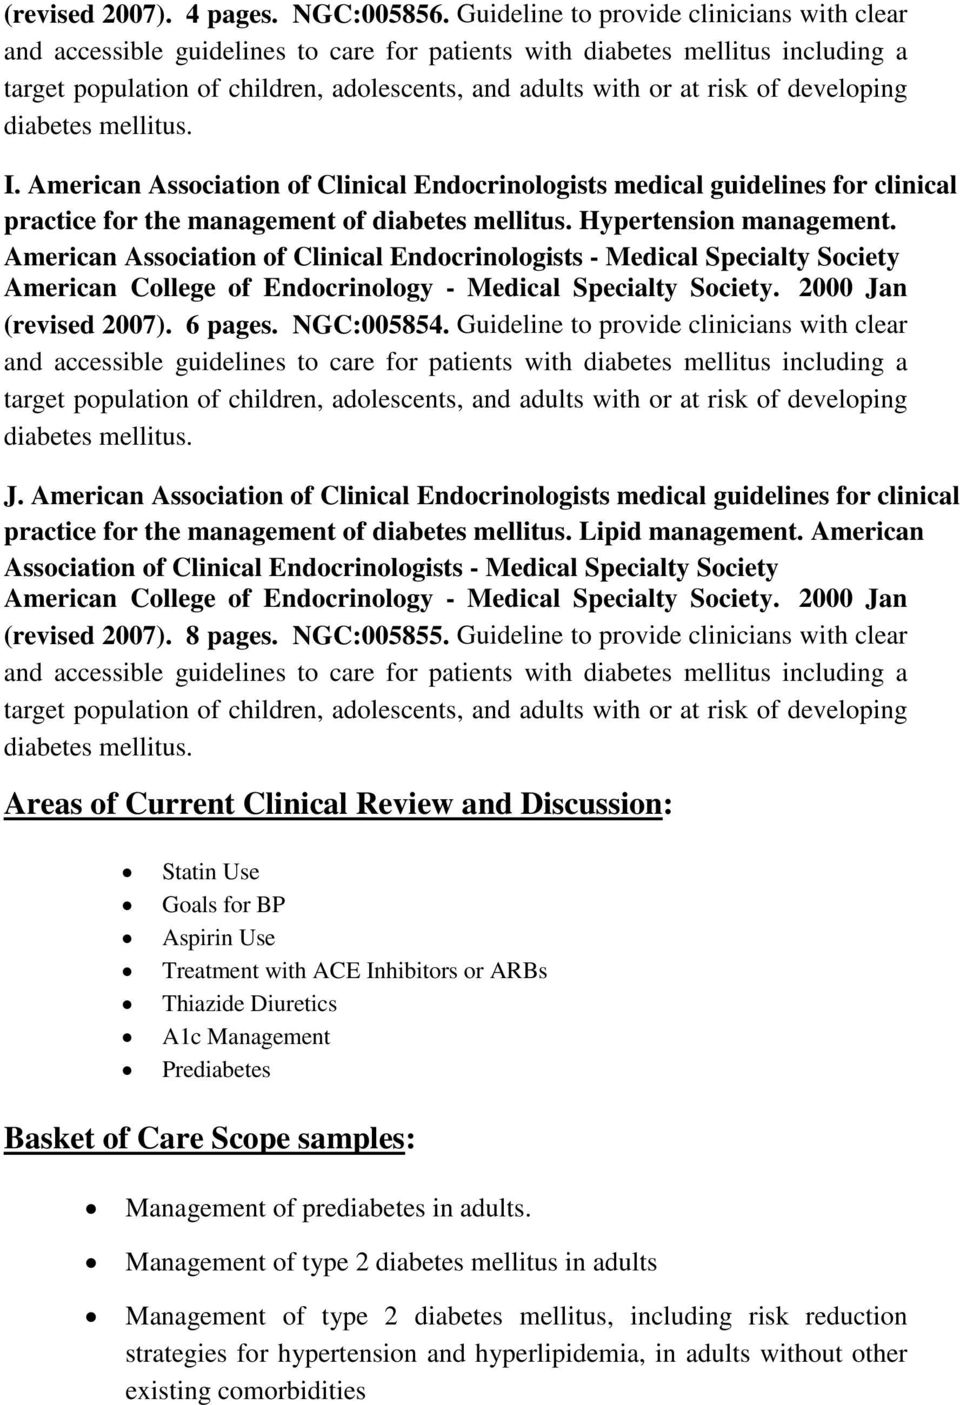 developing I. American Association of Clinical Endocrinologists medical guidelines for clinical practice for the management of Hypertension management.